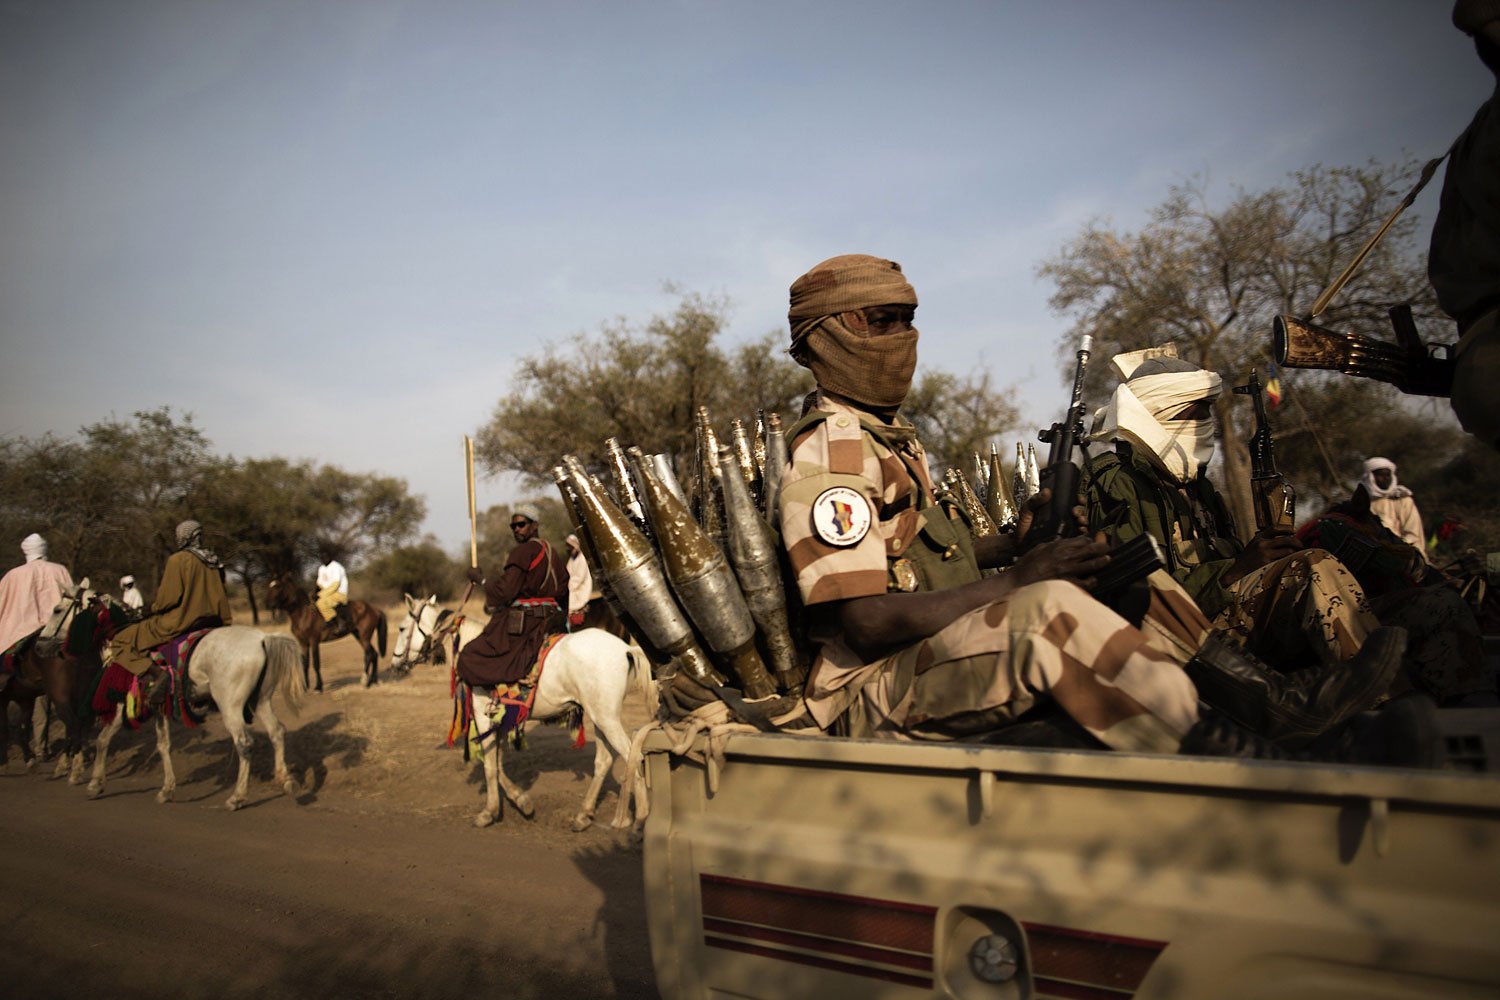 Chadian soldiers escorting the Chadian President, speed past horsemen arriving to attend a ceremony marking the 50th anniversary of the Zakouma National Park, Chad's oldest natural park, during which elephant tusks will be incinerated, Feb. 21, 2014.